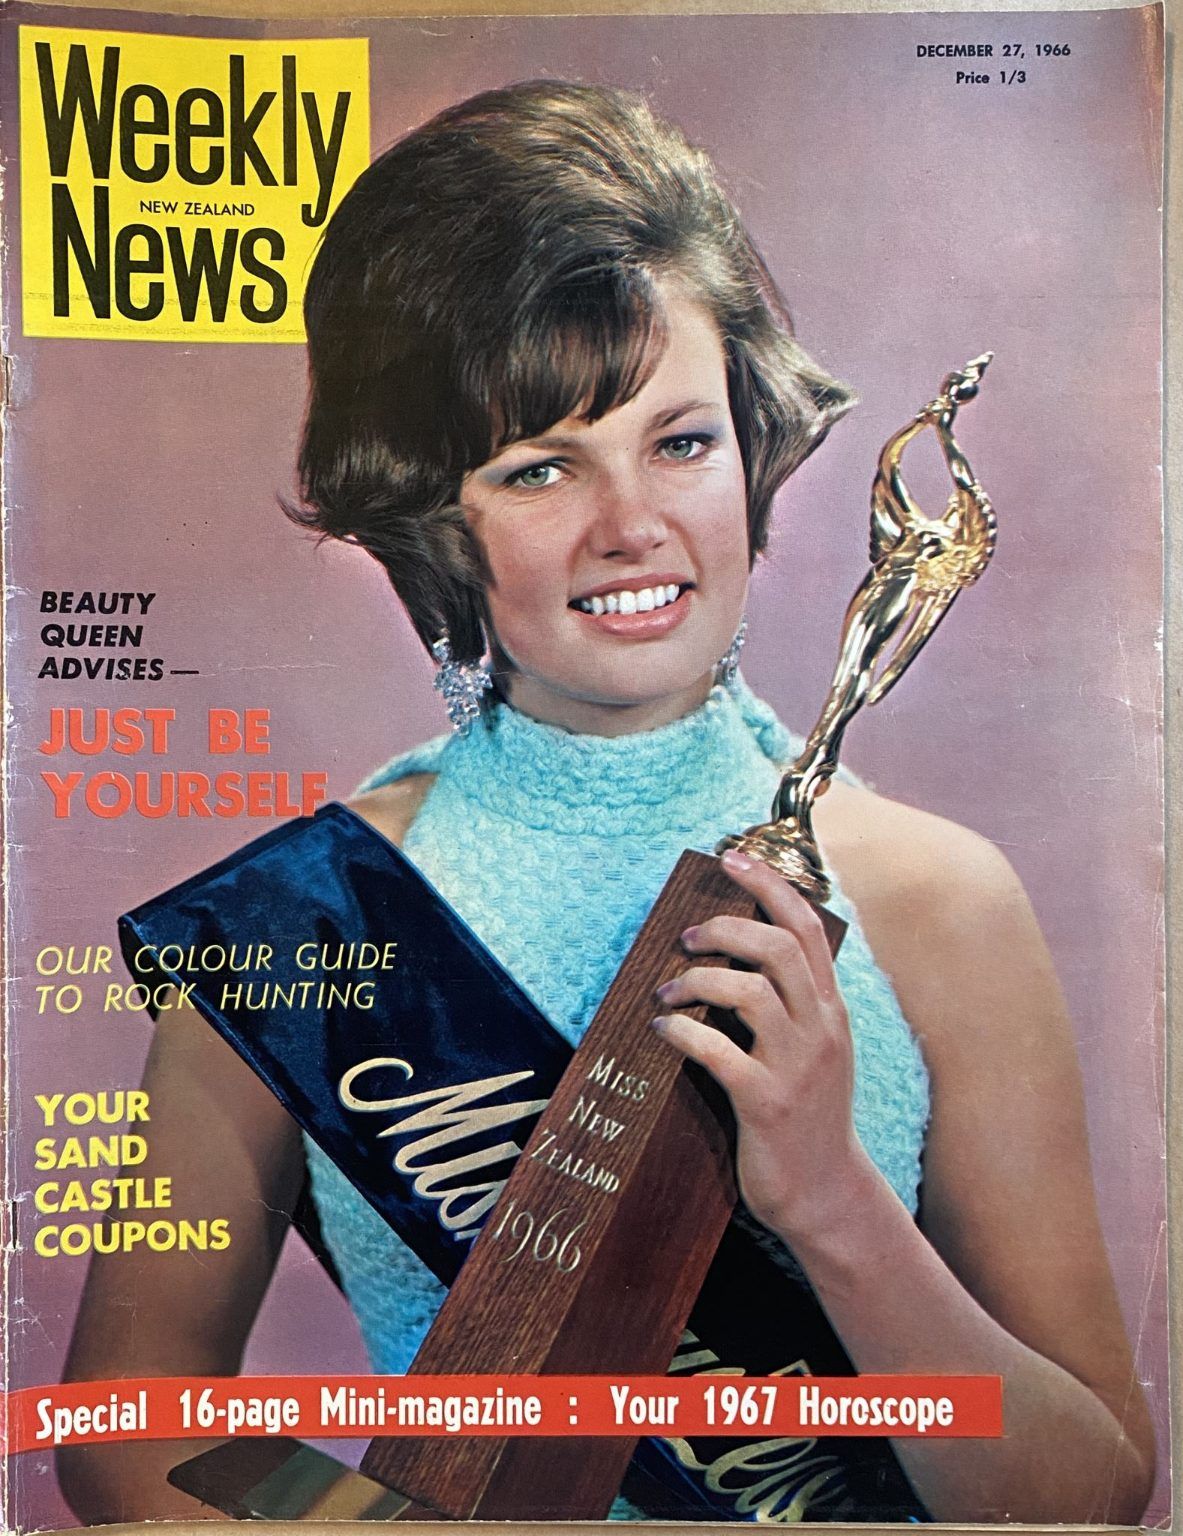 OLD NEWSPAPER: New Zealand Weekly News, No. 5379, 27 December 1966